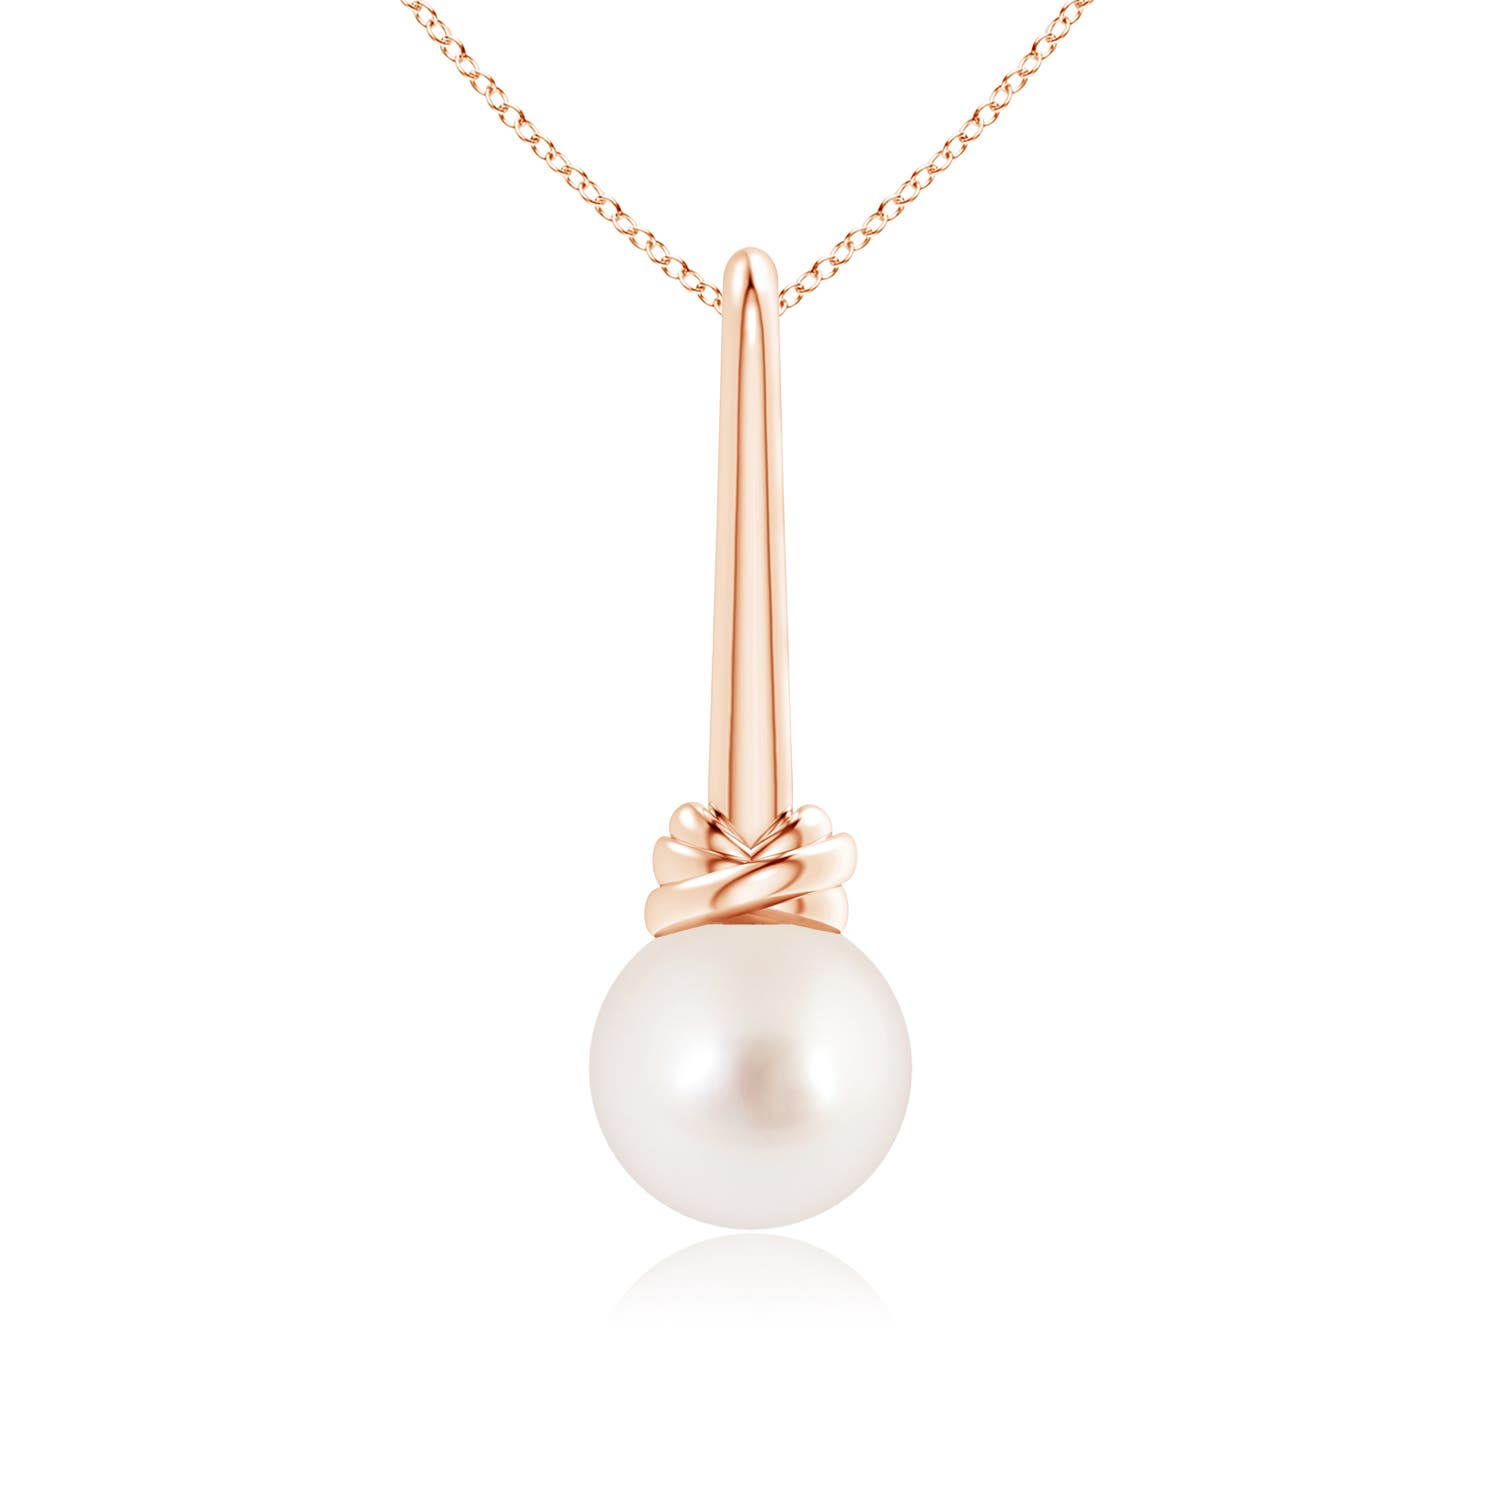 AAAA - South Sea Cultured Pearl / 5.25 CT / 14 KT Rose Gold